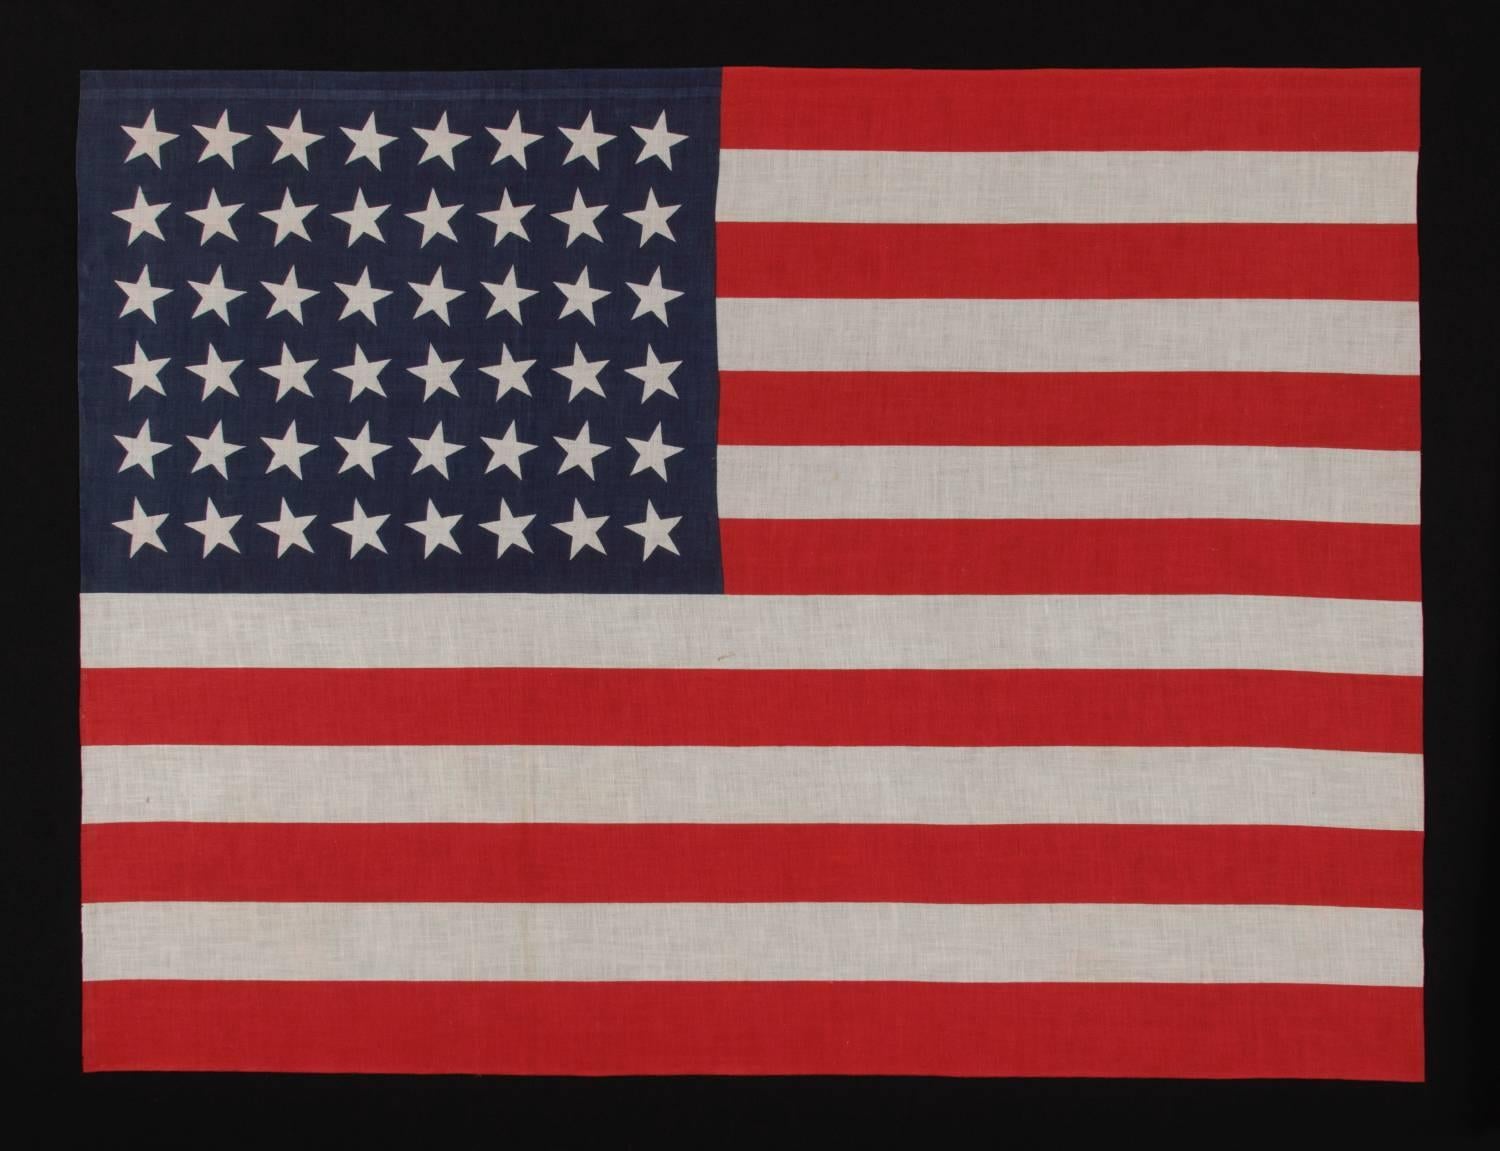 48 stars in dancing rows, a rare variety of antique American parade flag in a large-scale, 1912-1918 or perhaps earlier, Arizona and New Mexico Statehood:

 In 1912, President Taft passed an executive order that dictated, for the first time, an